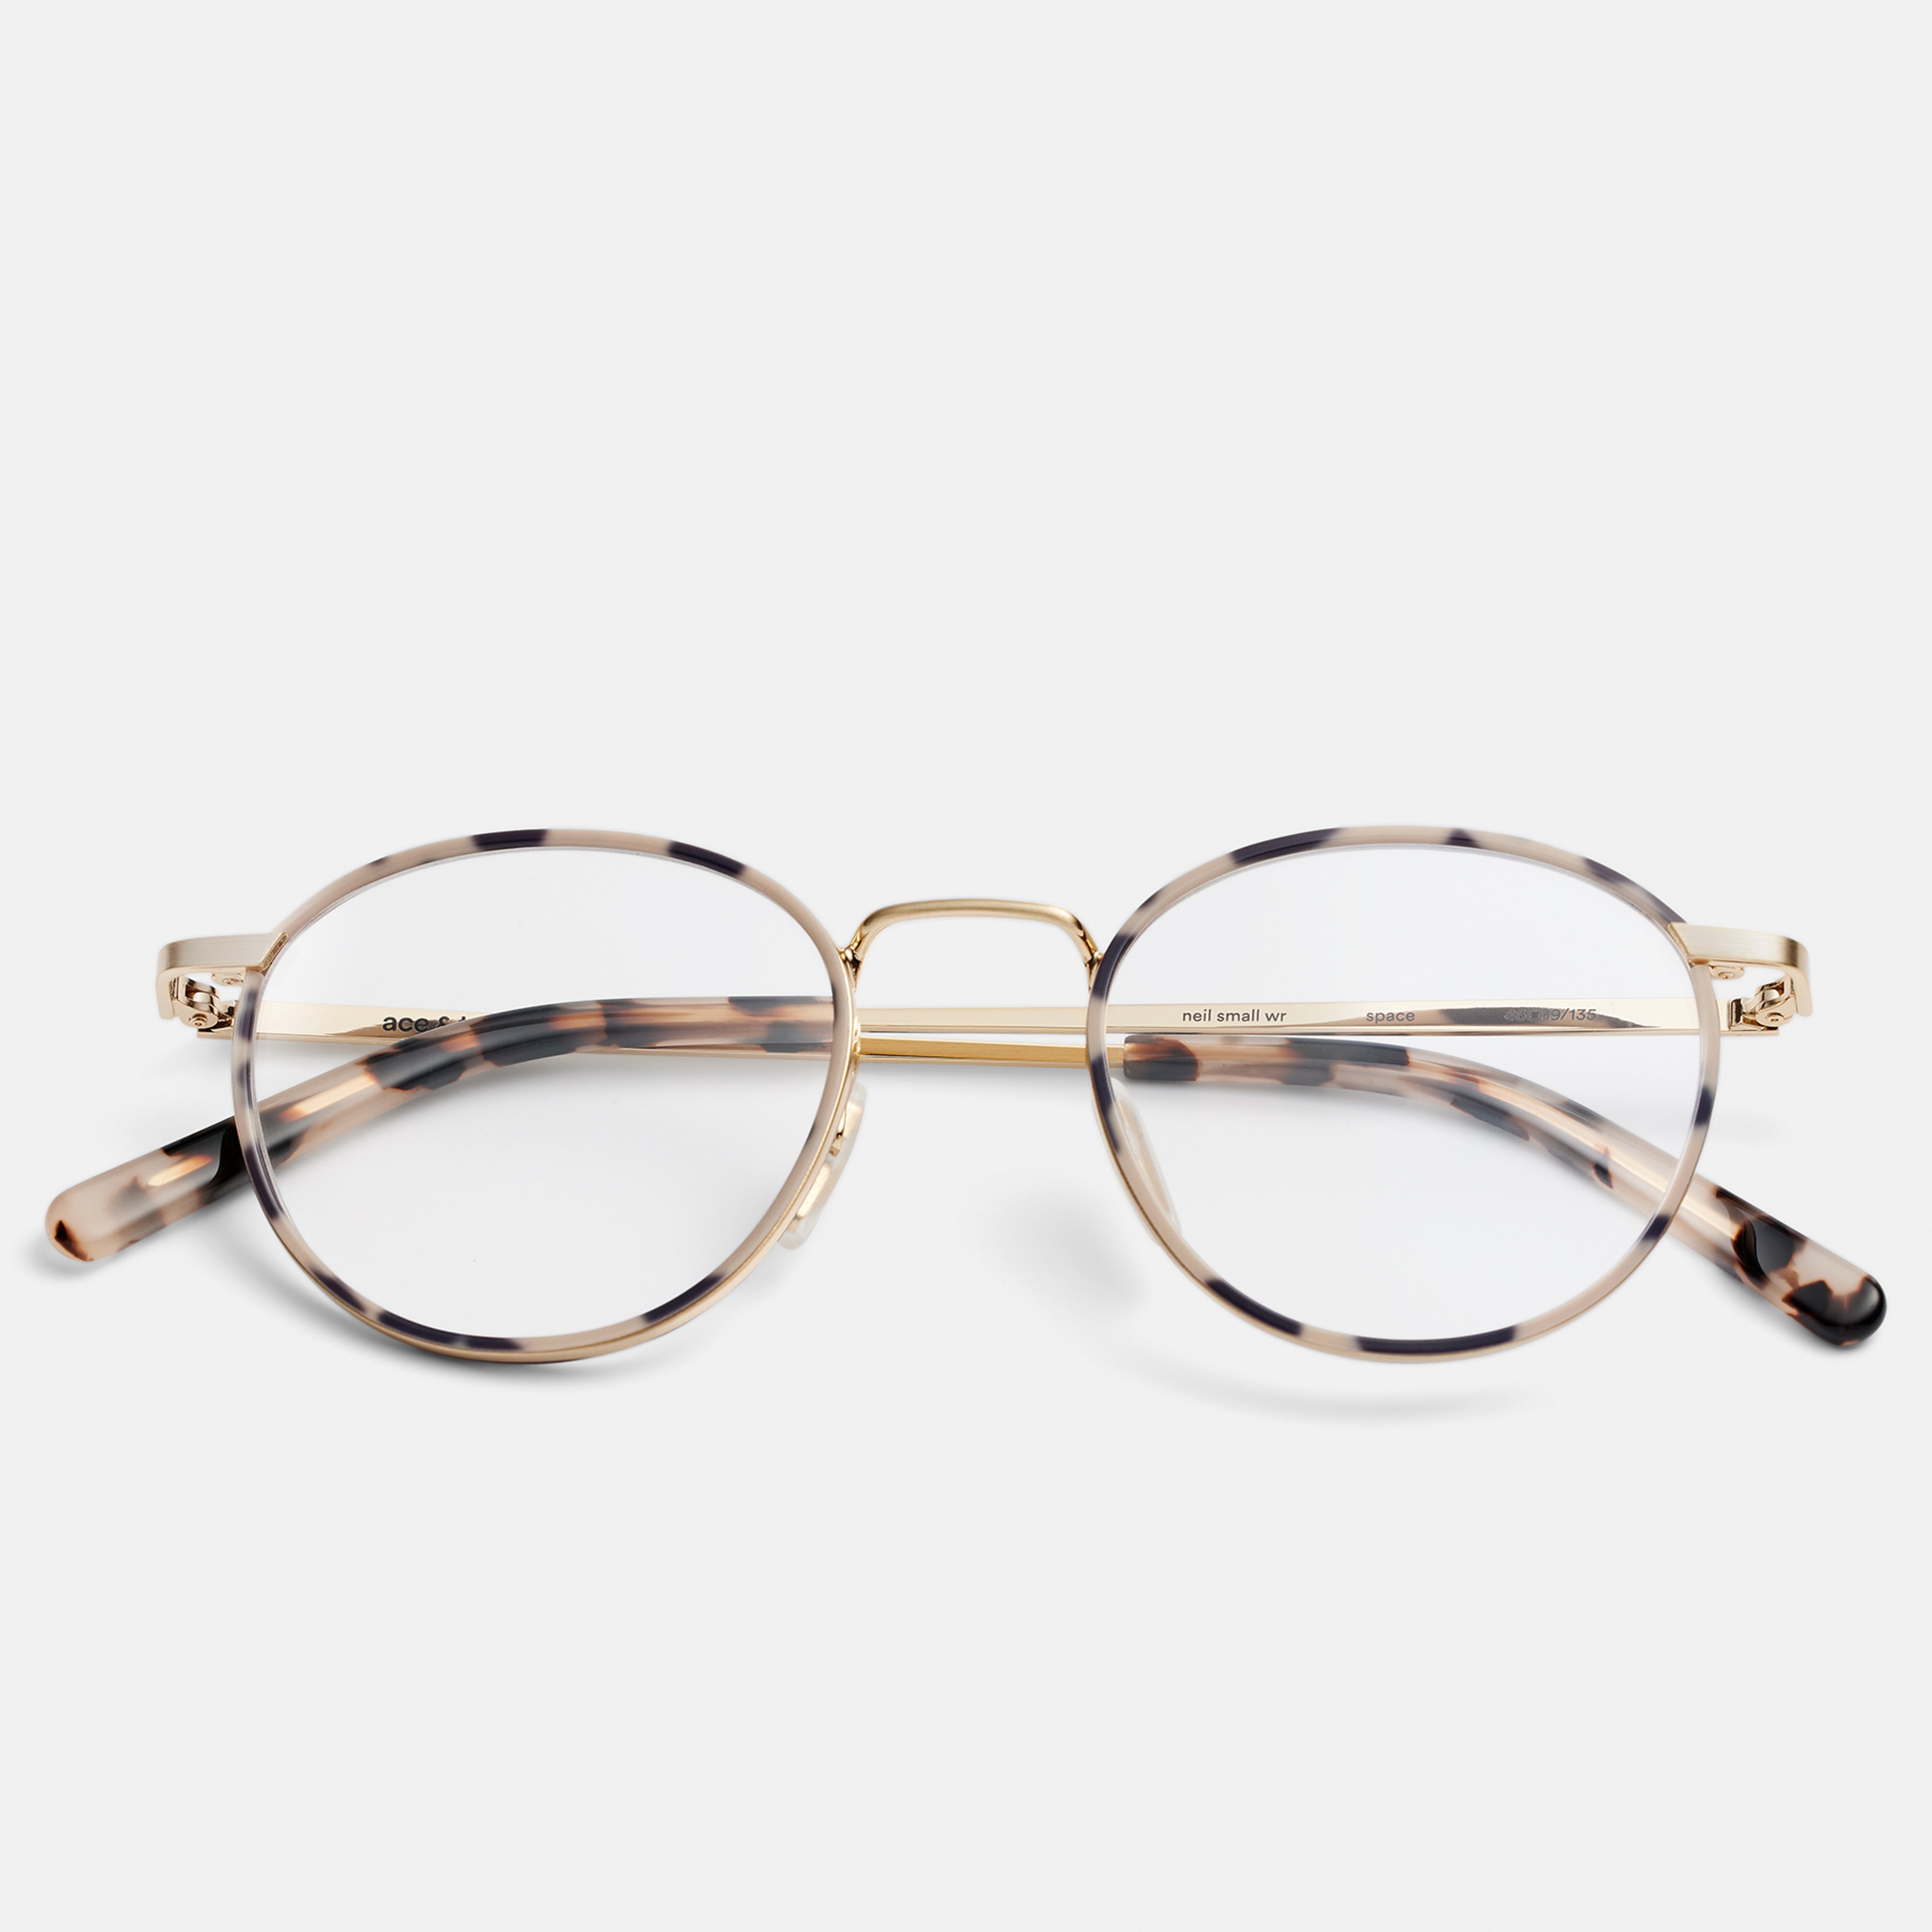 Ace & Tate Glasses | Round Metal in Beige, Brown